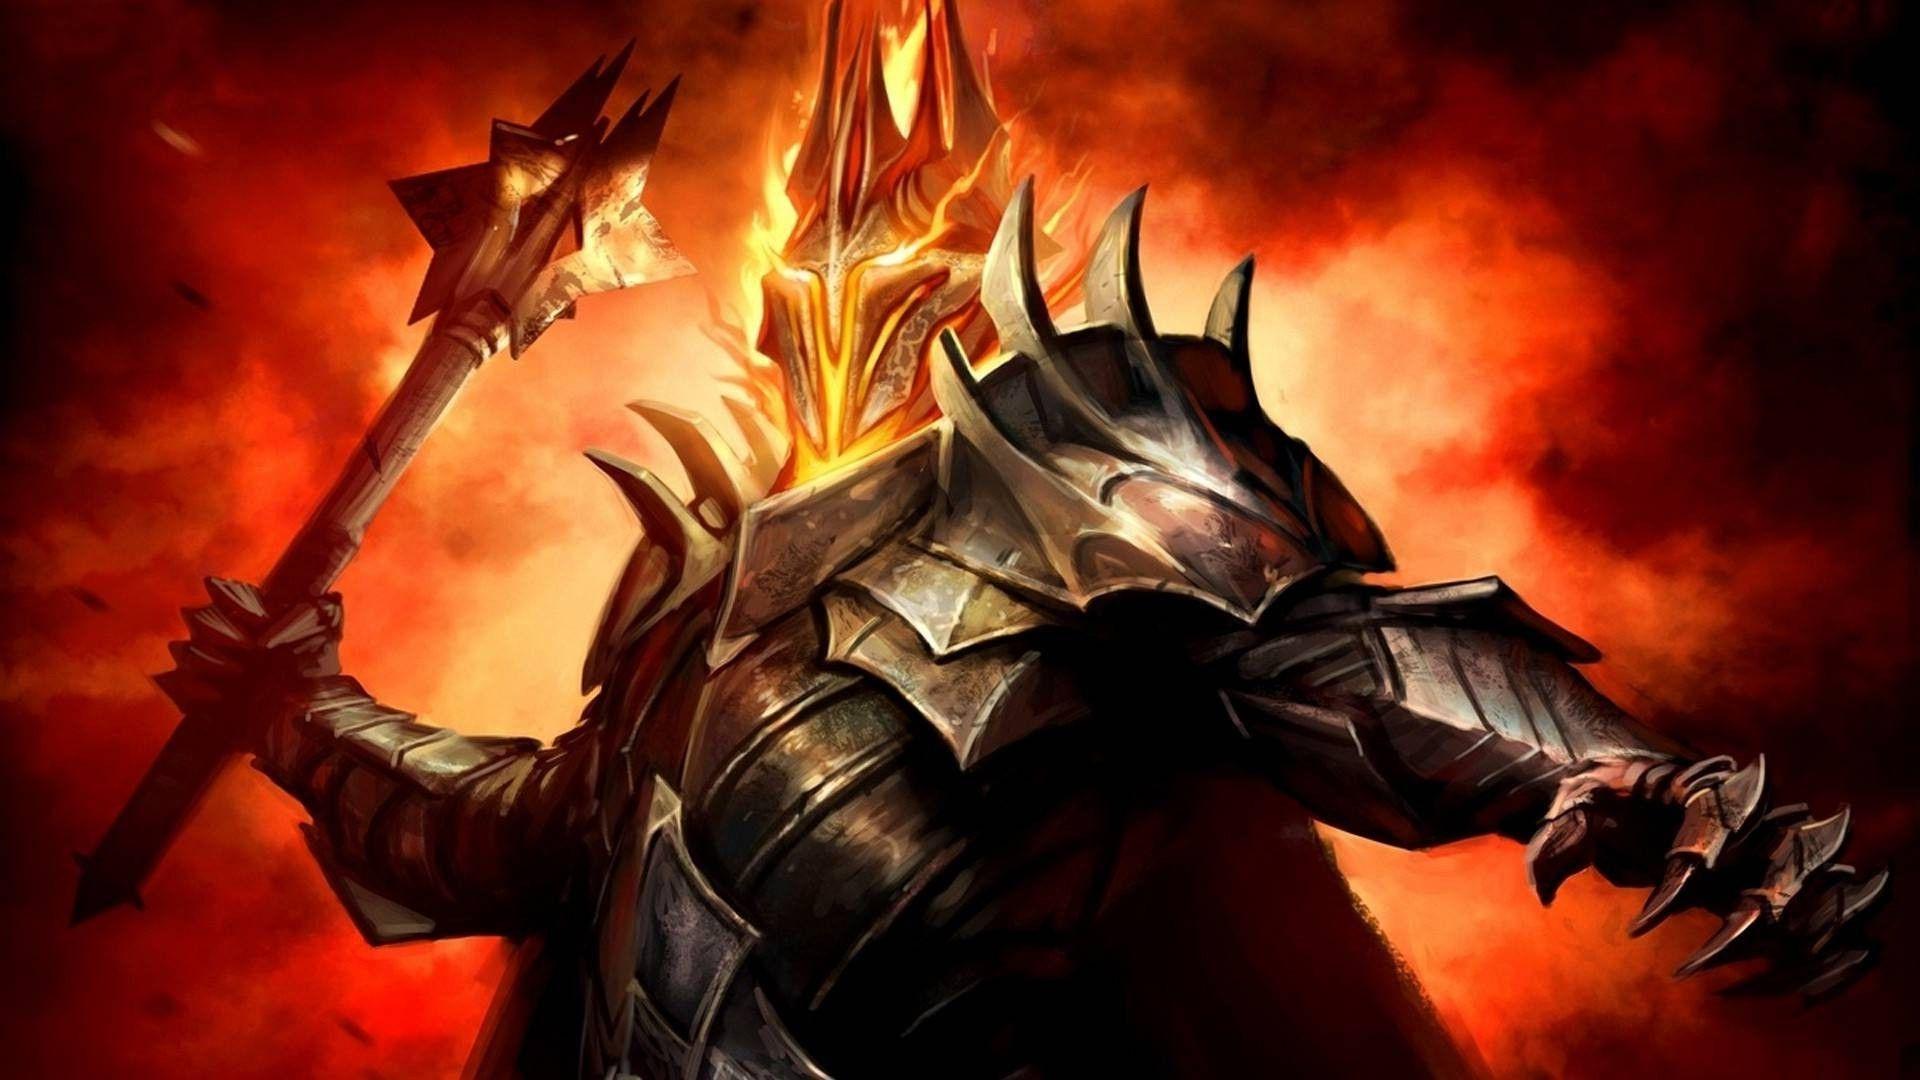 Wallpaper, 1920x1080 px, Sauron, The Lord of the Rings 1920x1080